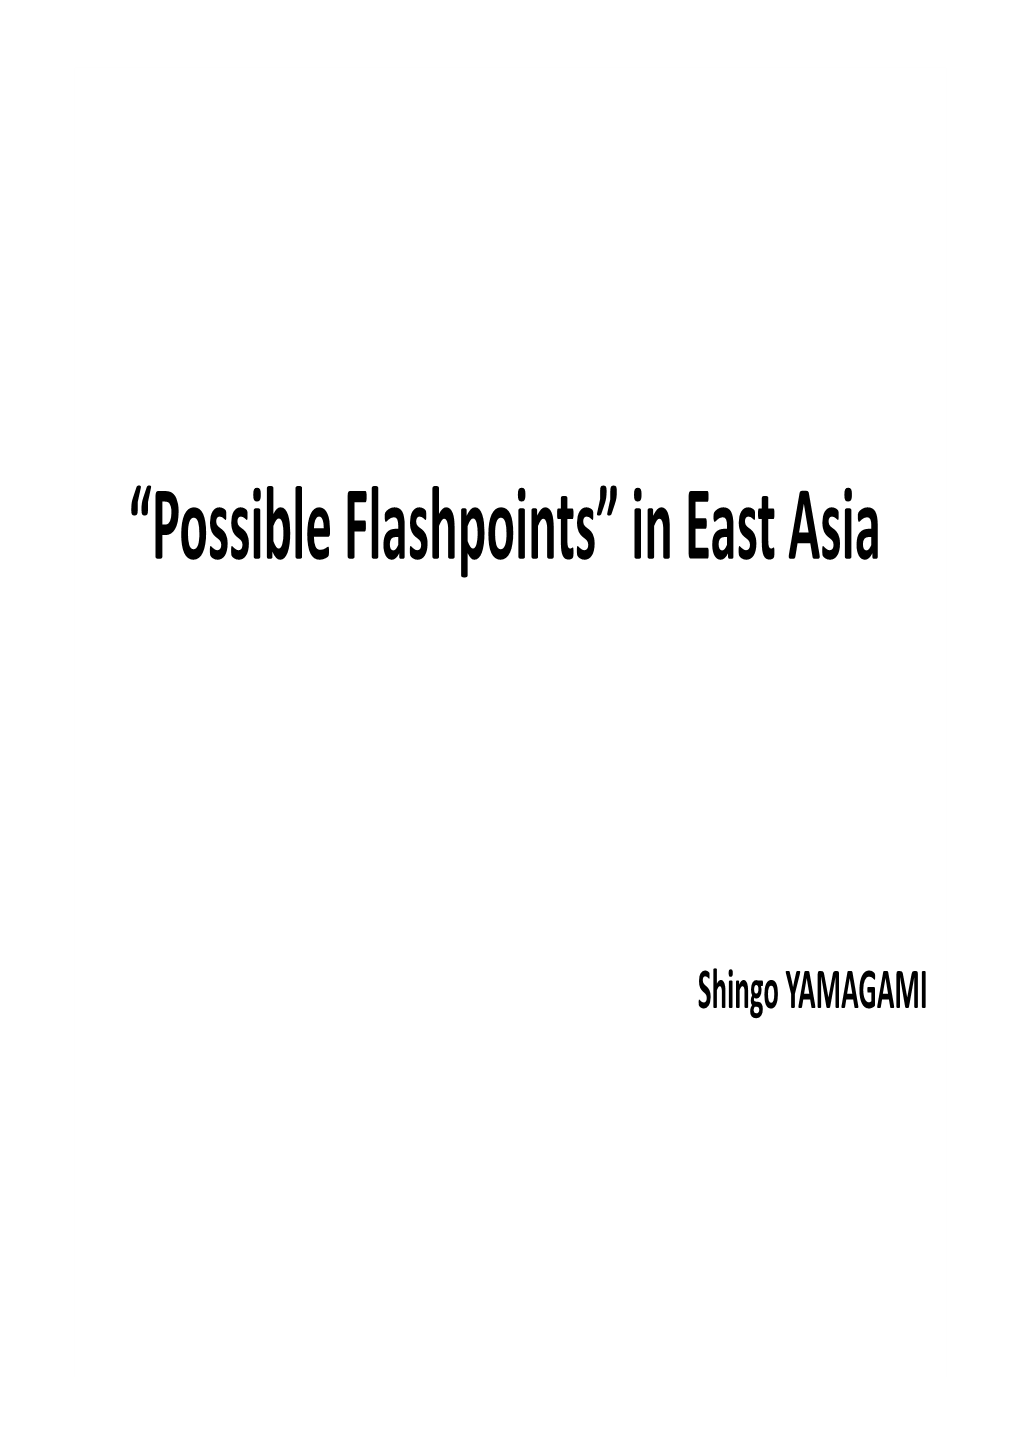 “Possible Flashpoints” in East Asia